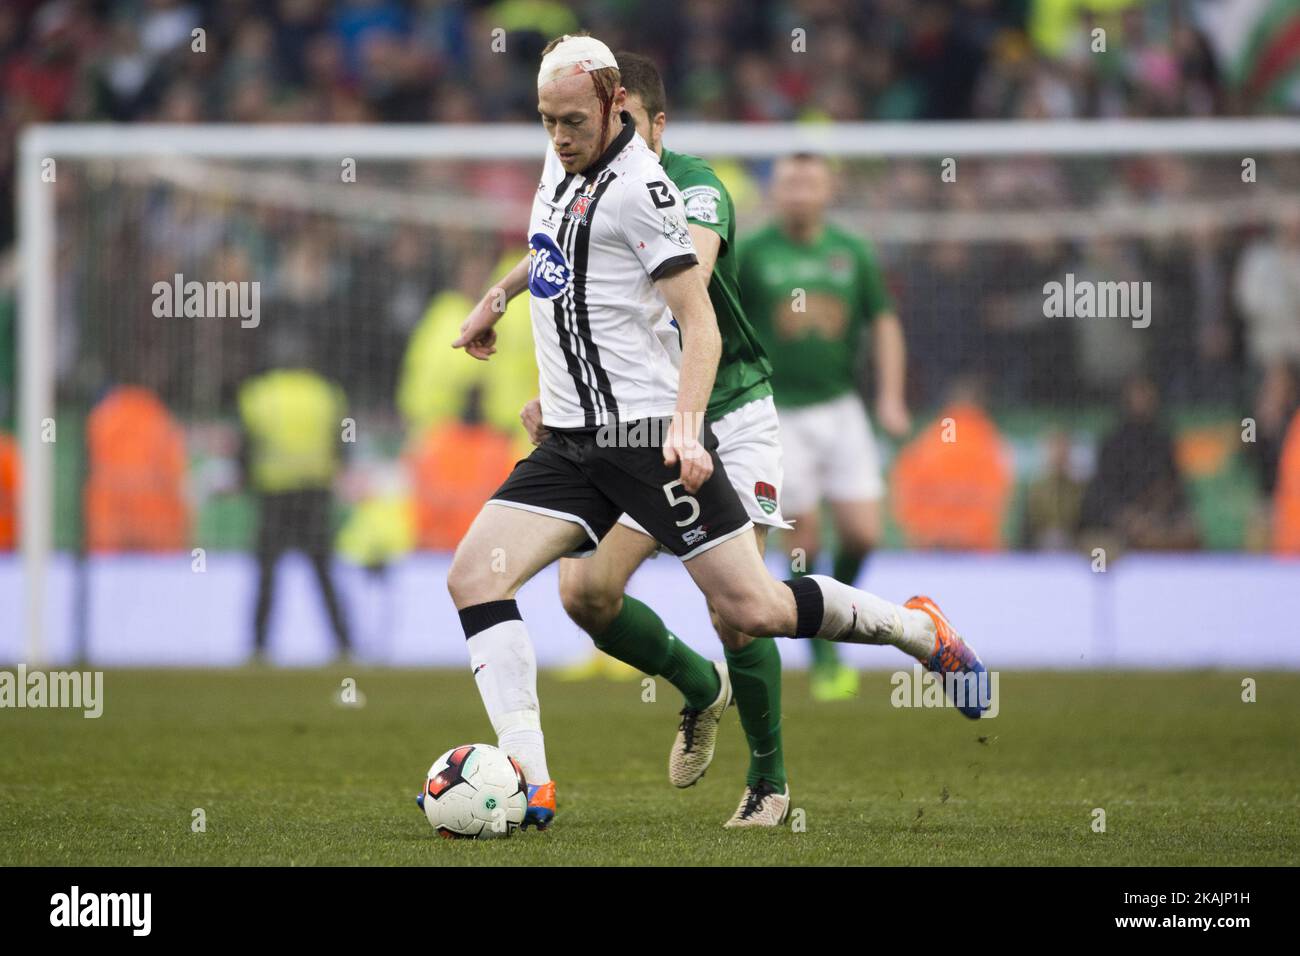 Chris Shields of Dundalk pictured in action during the Irish Daily Mail FAI Senior Cup Final 2016 match between Cork City and Dundalk FC at Aviva Stadium in Dublin, Ireland on November 6, 2016. Stock Photo